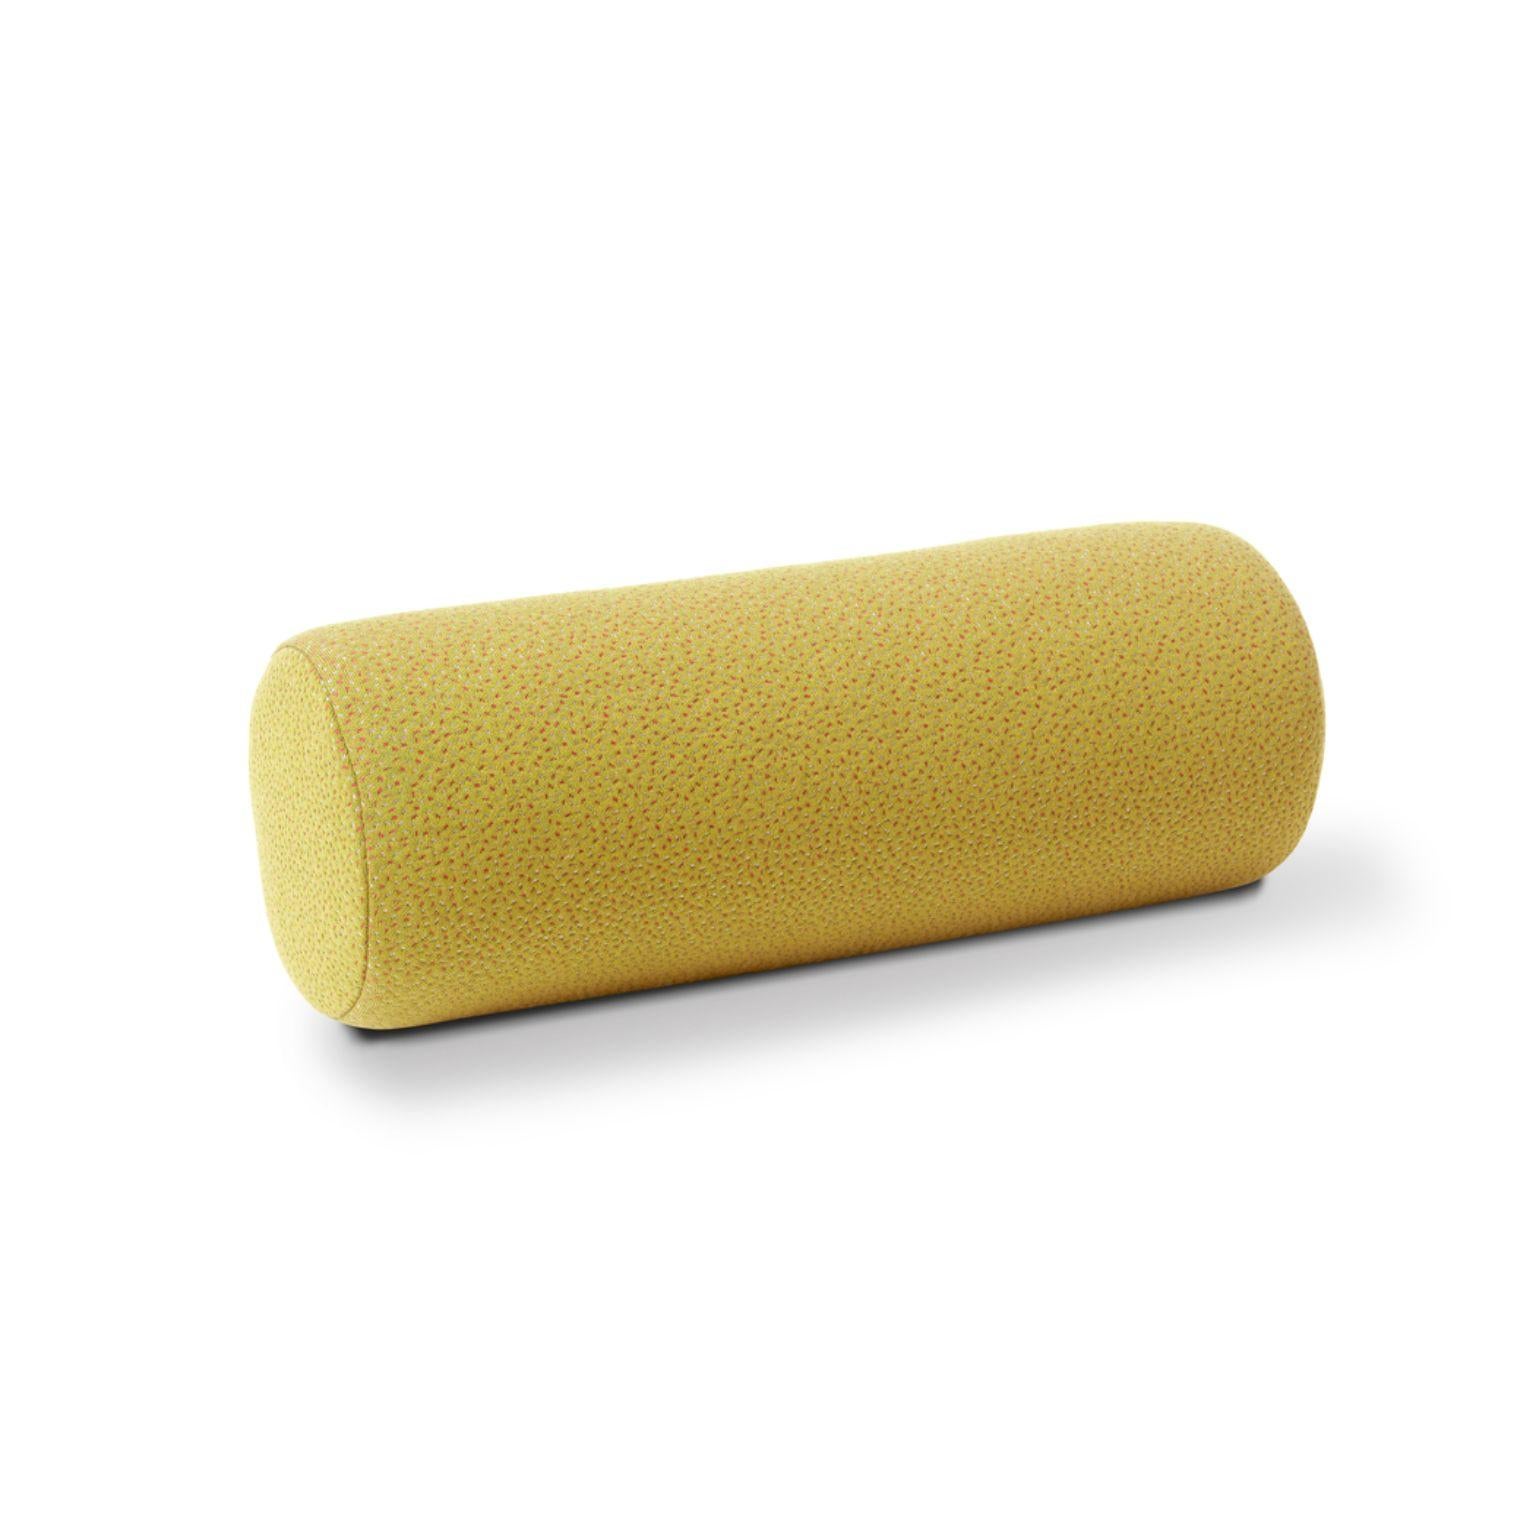 Galore cushion sprinkles desert yellow by Warm Nordic.
Dimensions: D16 x H 46 cm.
Material: Textile upholstery, Granulate and feathers filling.
Weight: 0.9 kg
Also available in different colours and finishes. 

An elegant bolster cushion,